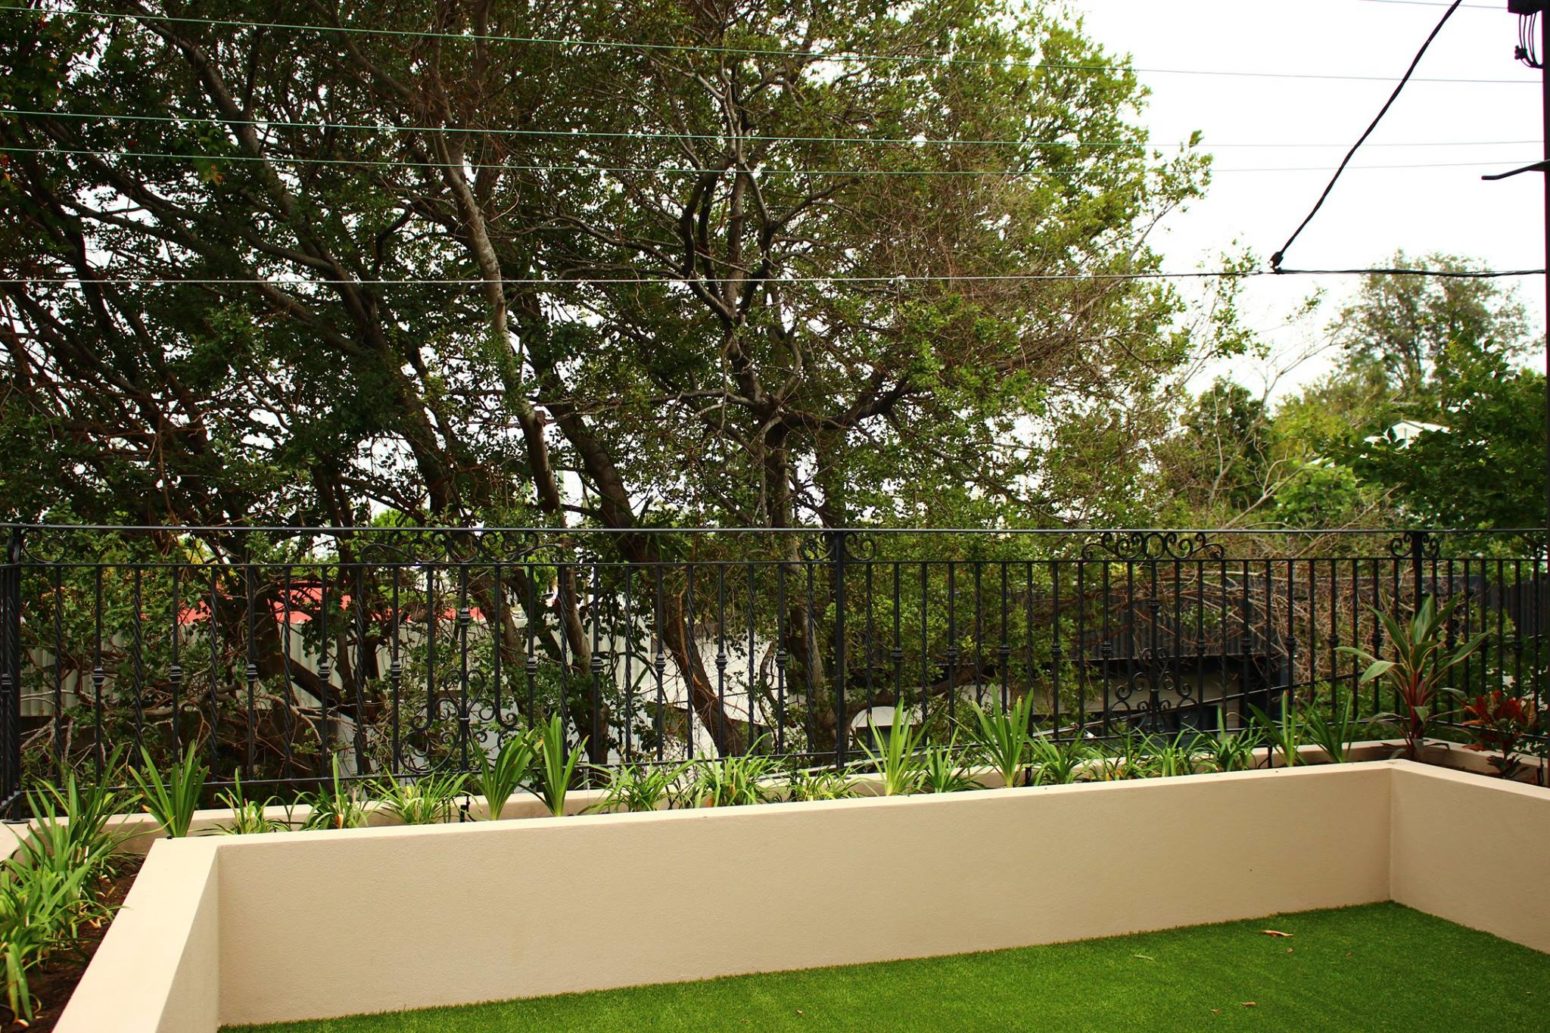 Caring For Your Wrought Iron Fence – Tips From The Experts